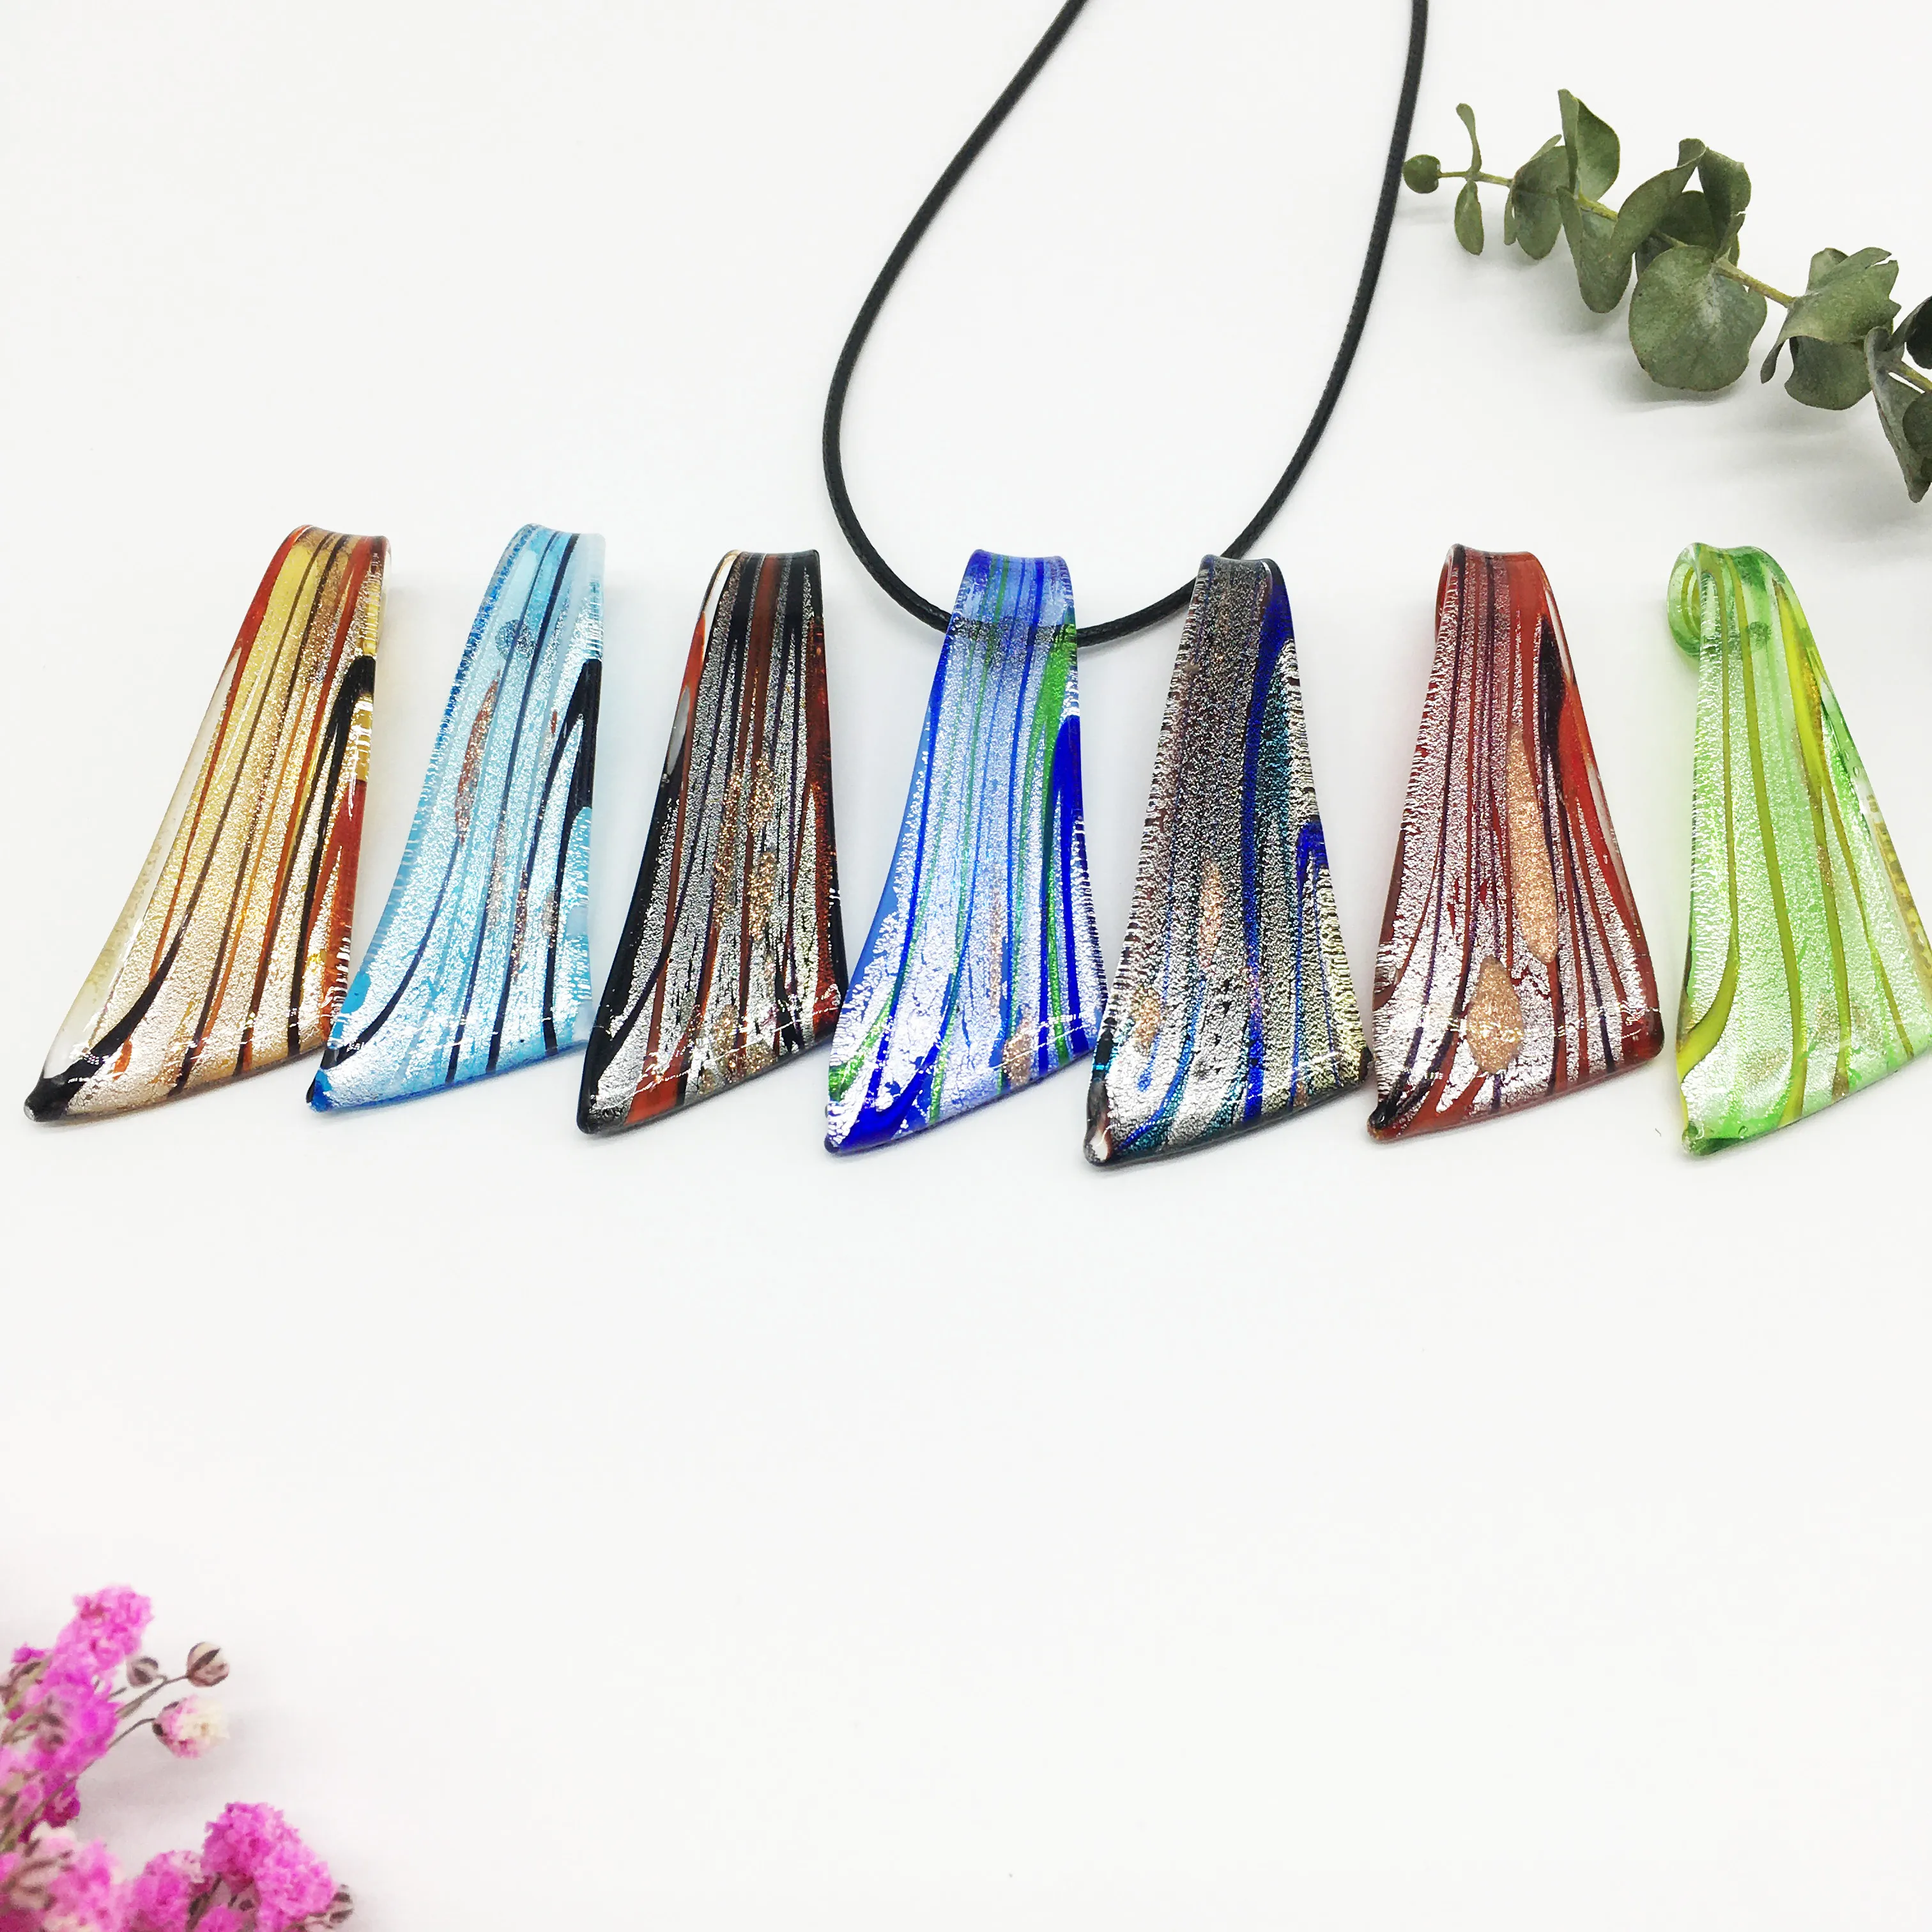 7PCS Blue Pendant Necklace Knife Shapes Colored Murano Glass Lampwork Earrings Jewelry For Women Items Chinese